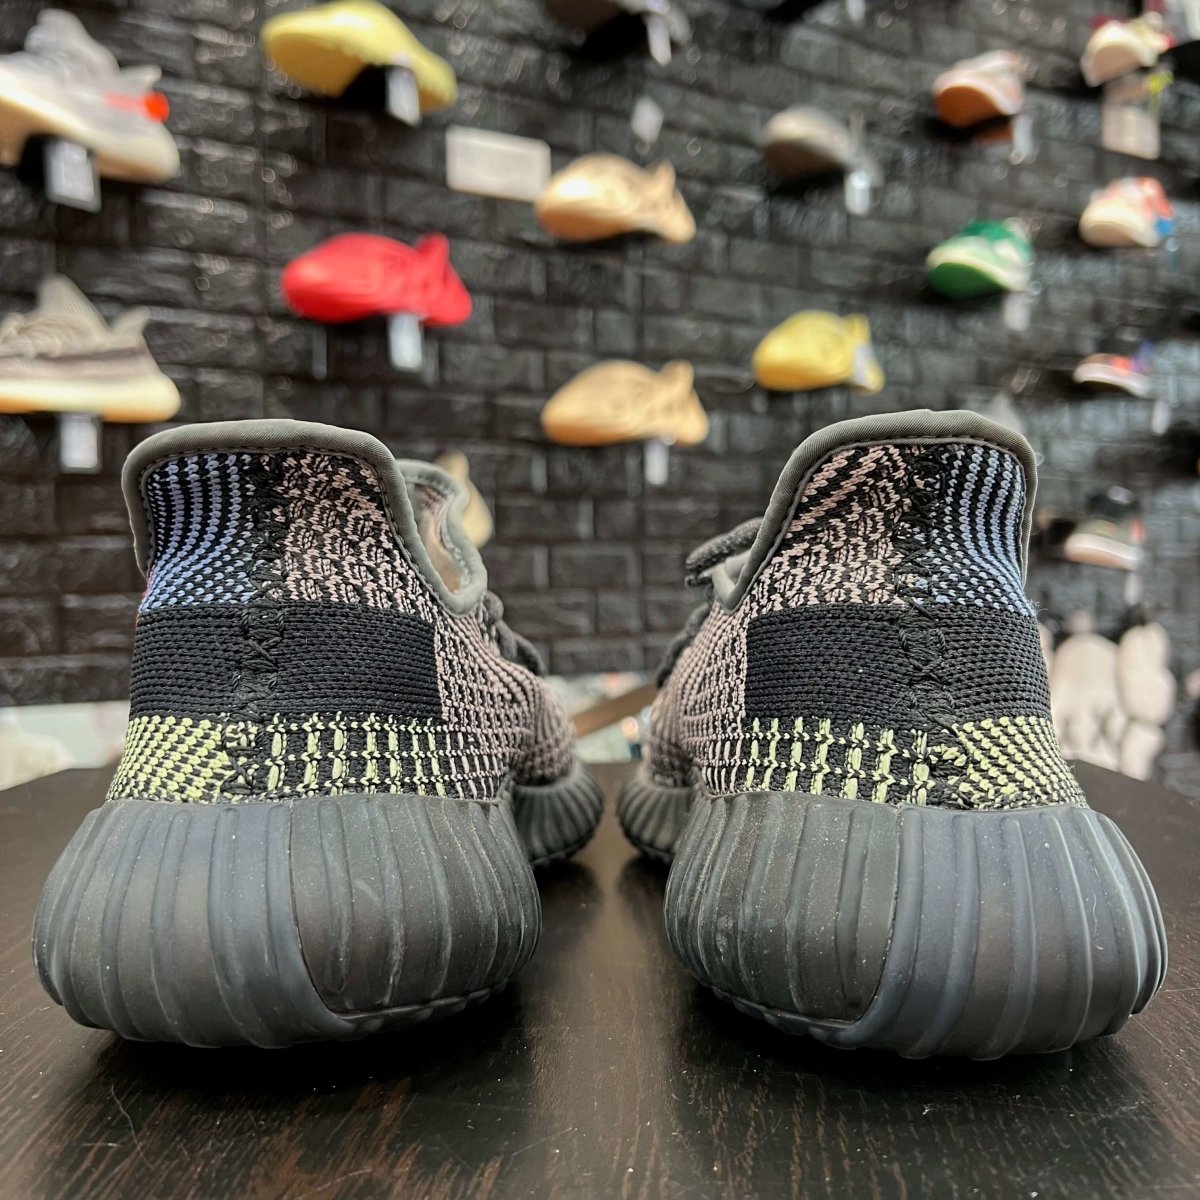 Yeezy Boost 350 V2 Yecheil (Non-Reflective) - Gently Enjoyed (Used) Men 10.5 - Low Sneaker - Yeezy - Jawns on Fire - sneakers